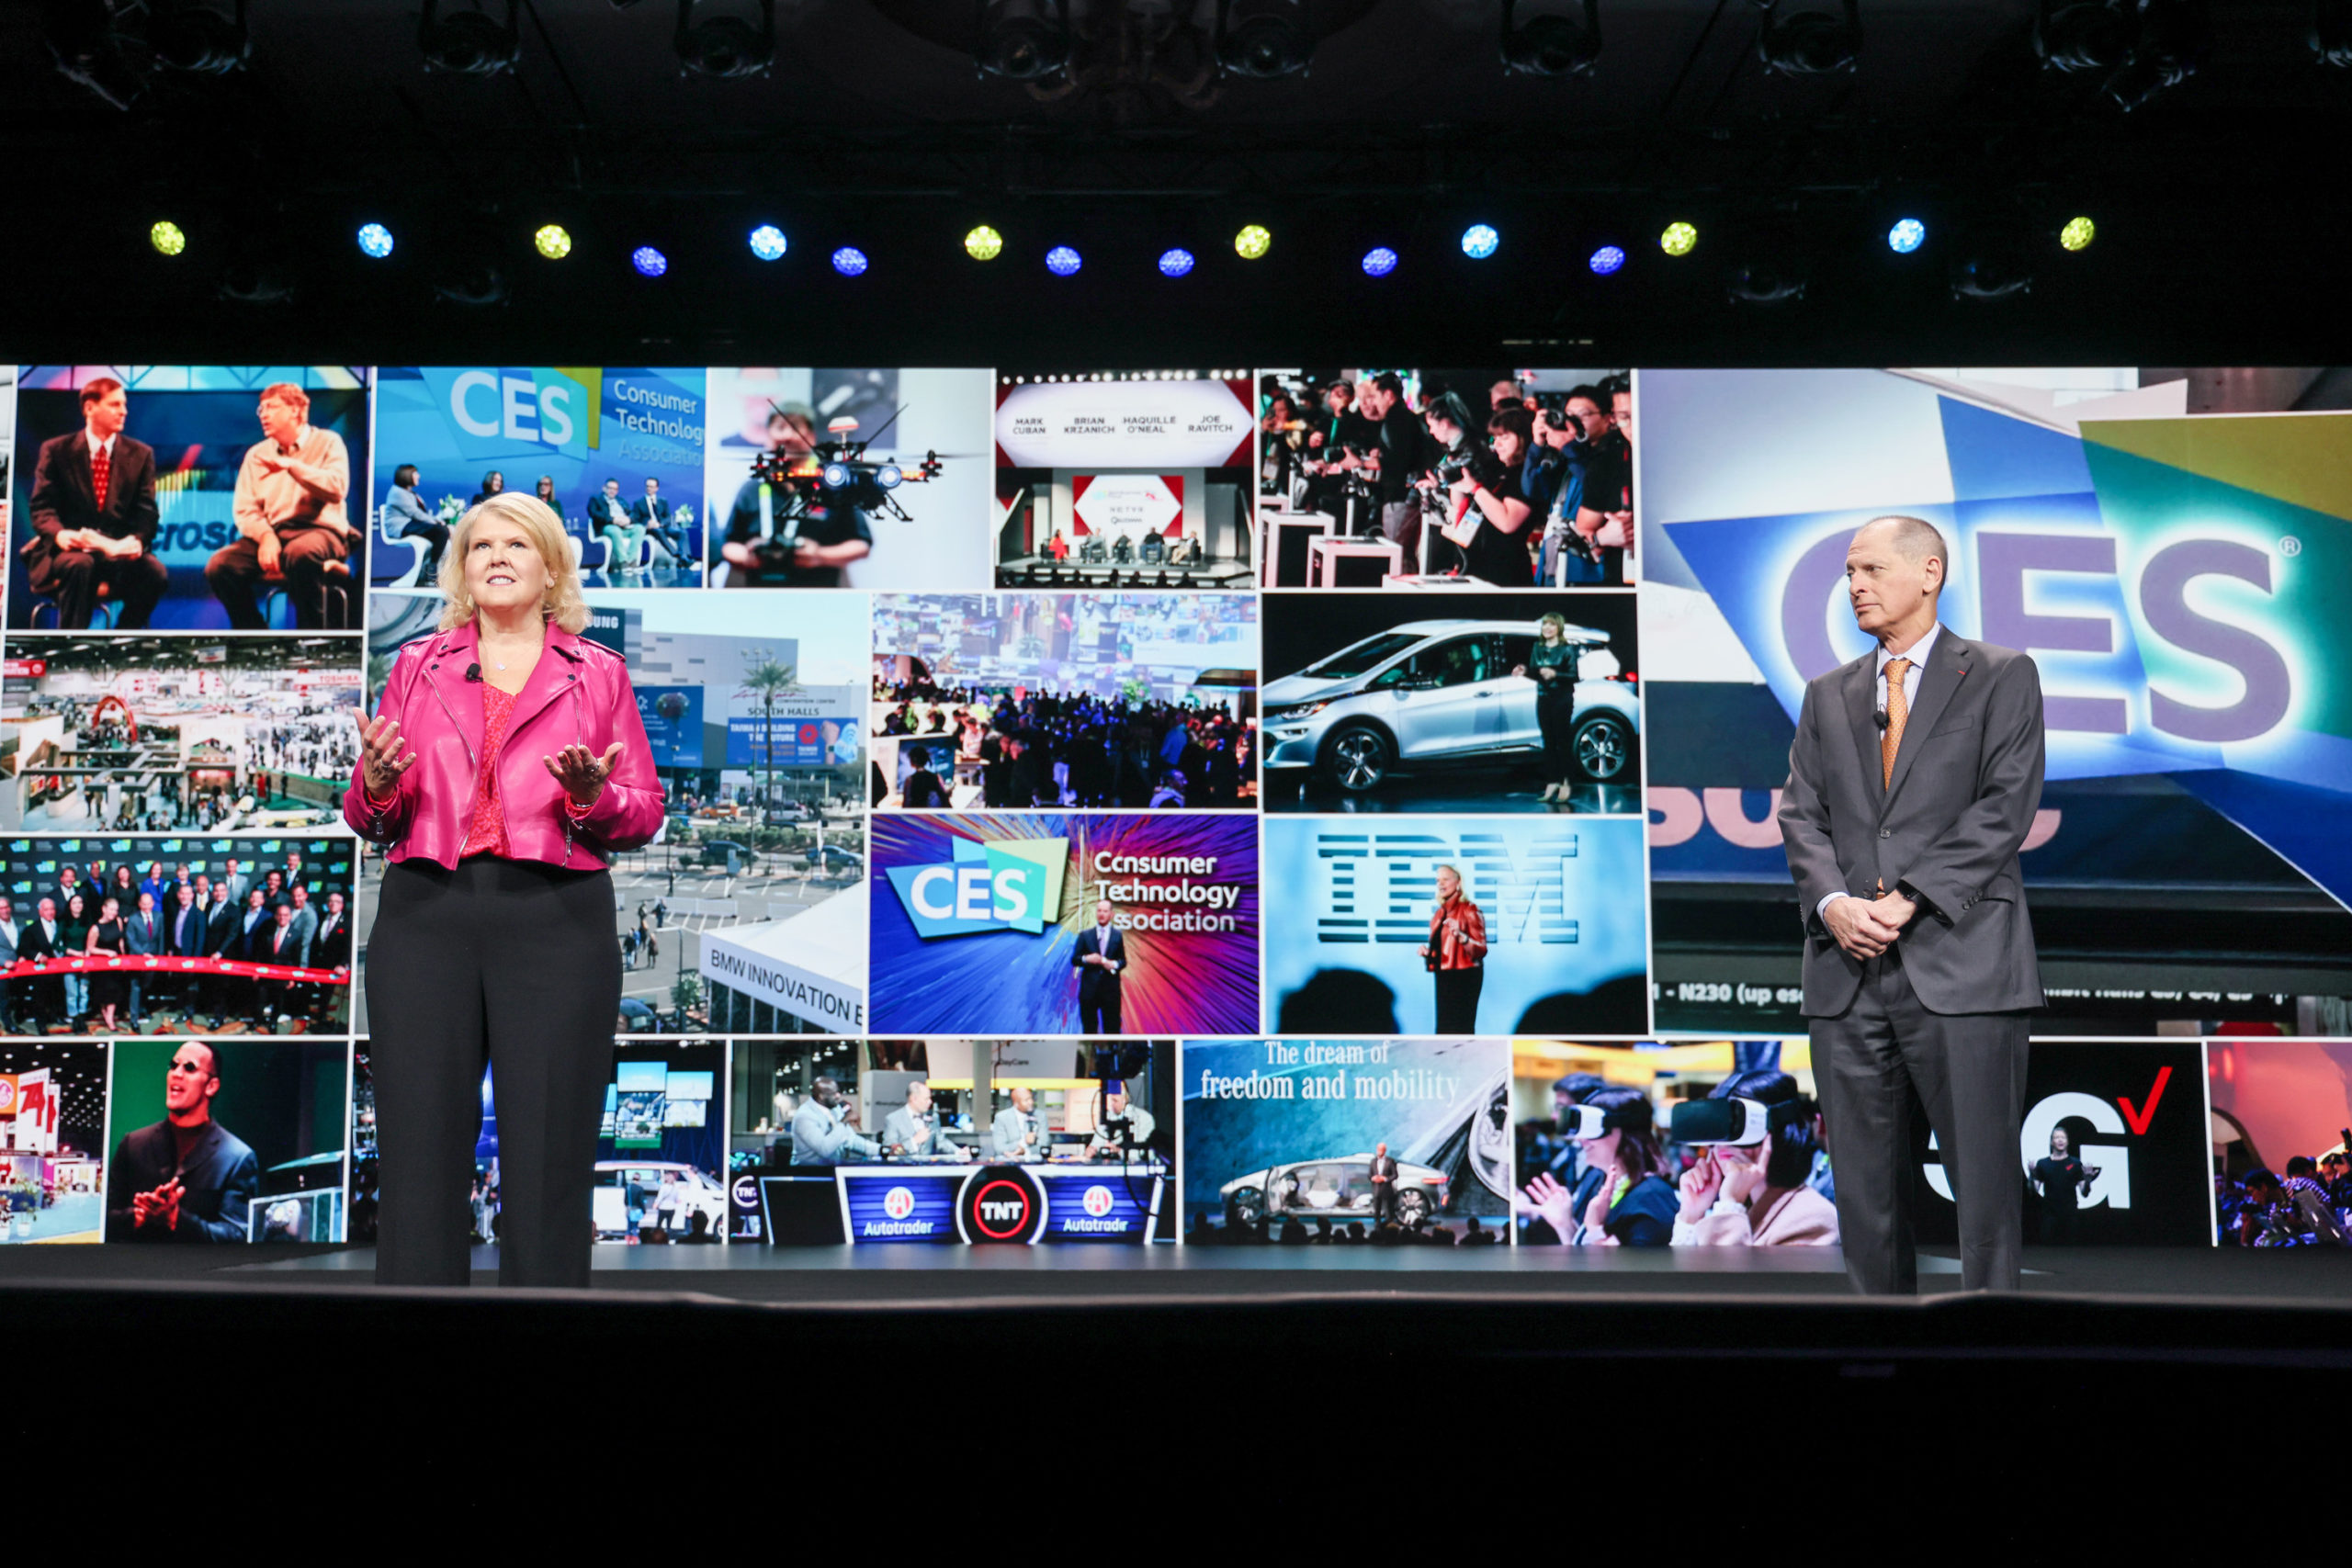 Doing Hybrid Events Right Is Hard: Top CES Official